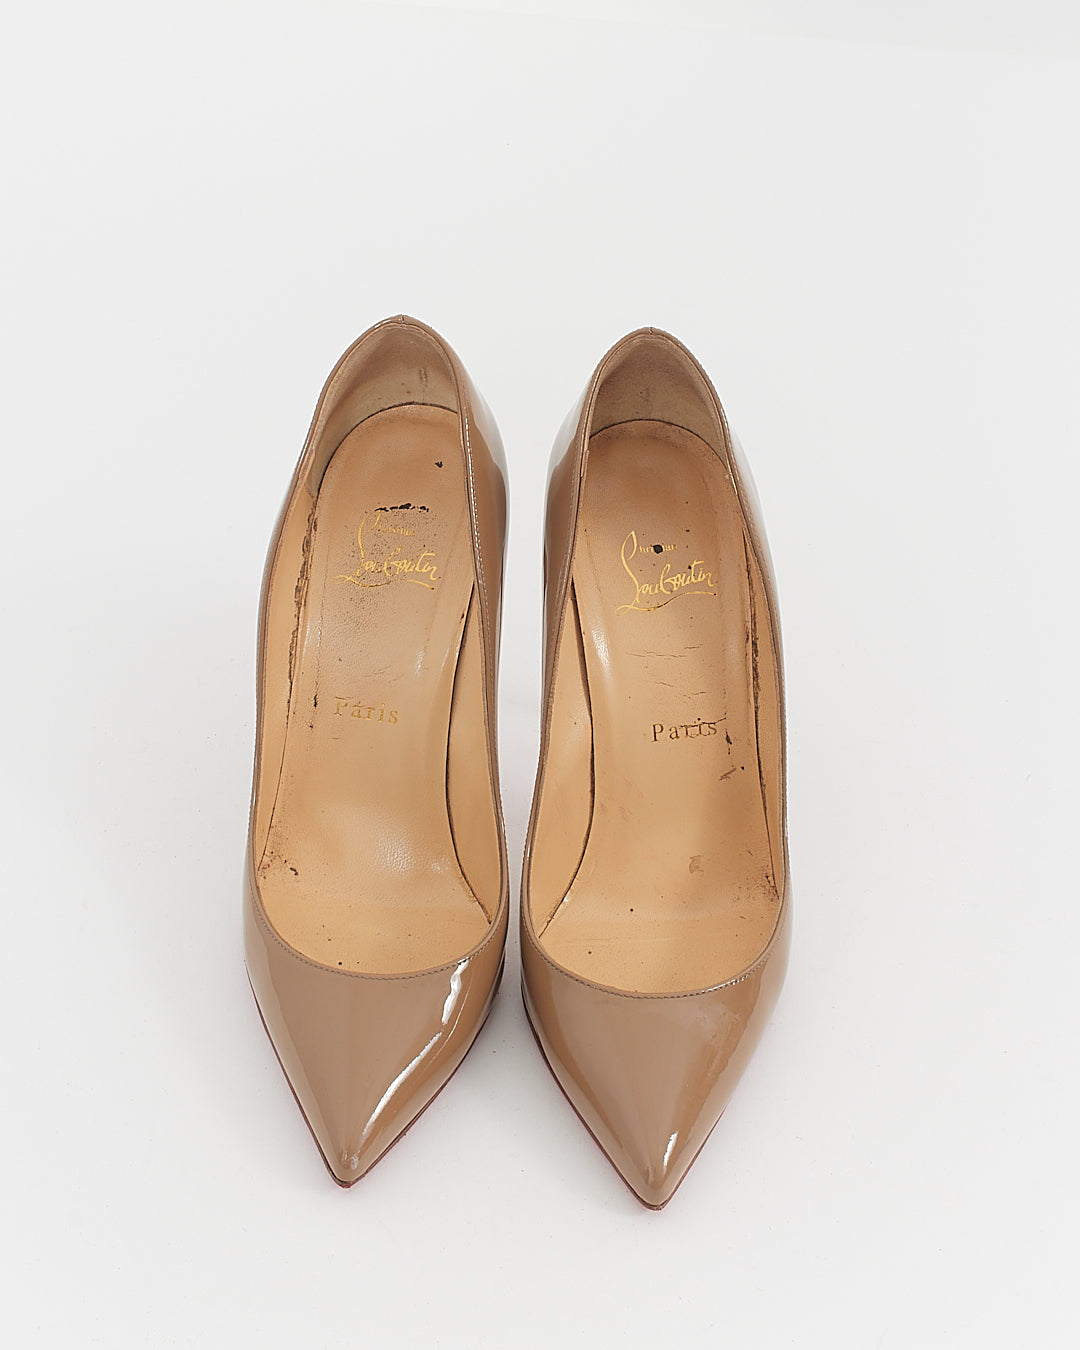 Christian Louboutin Dark Beige Patent Leather So Kate 120mm Pumps - 38